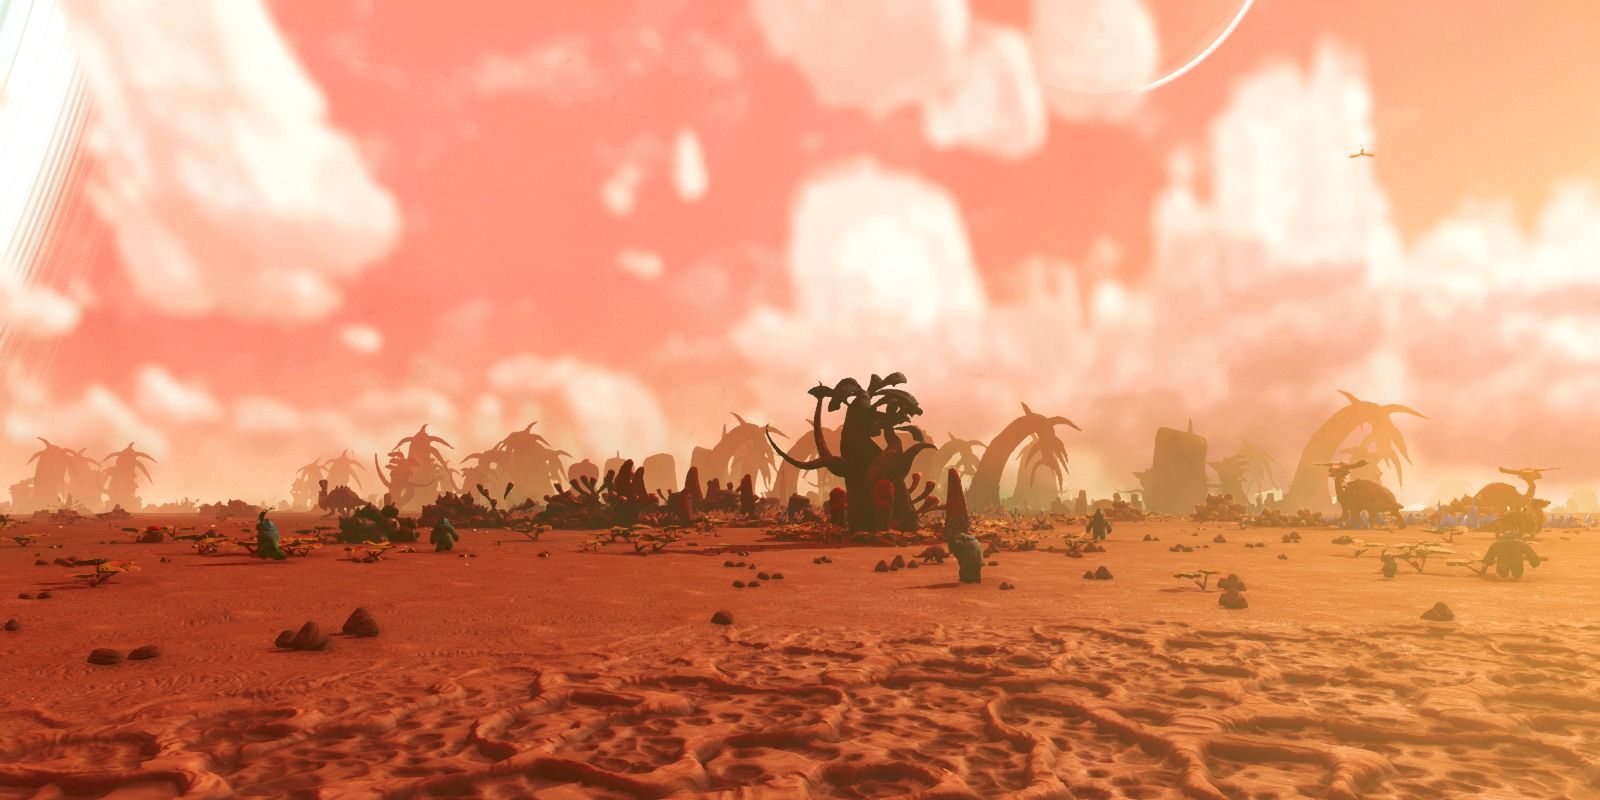 Irradiated planets surface